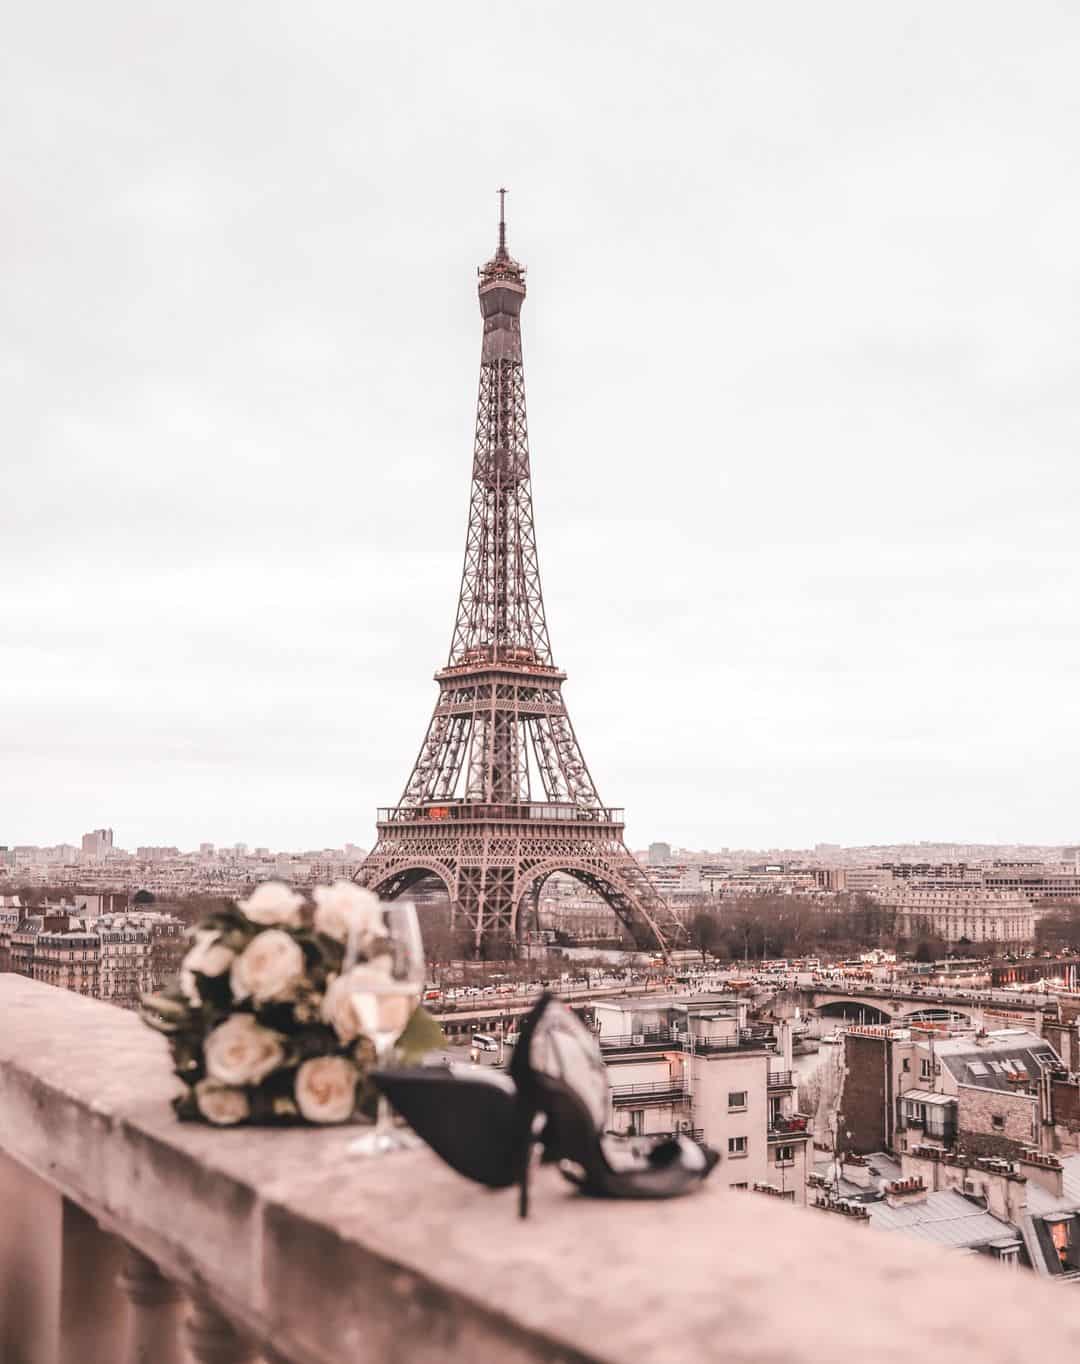 A pair of black high heels and a bouquet of white roses sit on a ledge in front of the Eiffel Tower. - Eiffel Tower